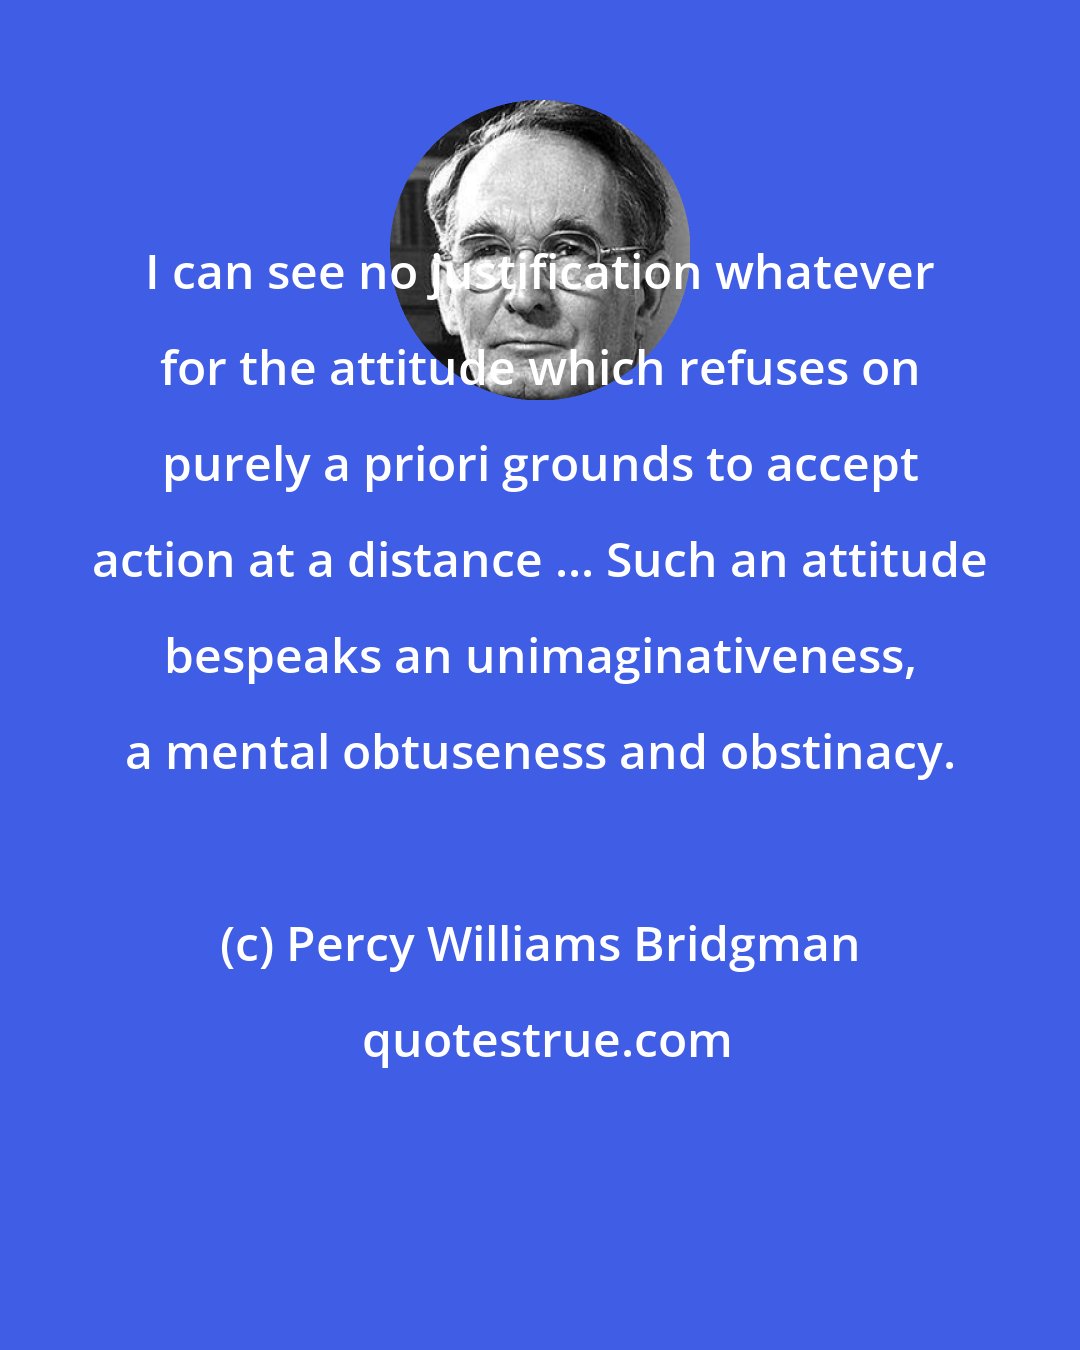 Percy Williams Bridgman: I can see no justification whatever for the attitude which refuses on purely a priori grounds to accept action at a distance ... Such an attitude bespeaks an unimaginativeness, a mental obtuseness and obstinacy.